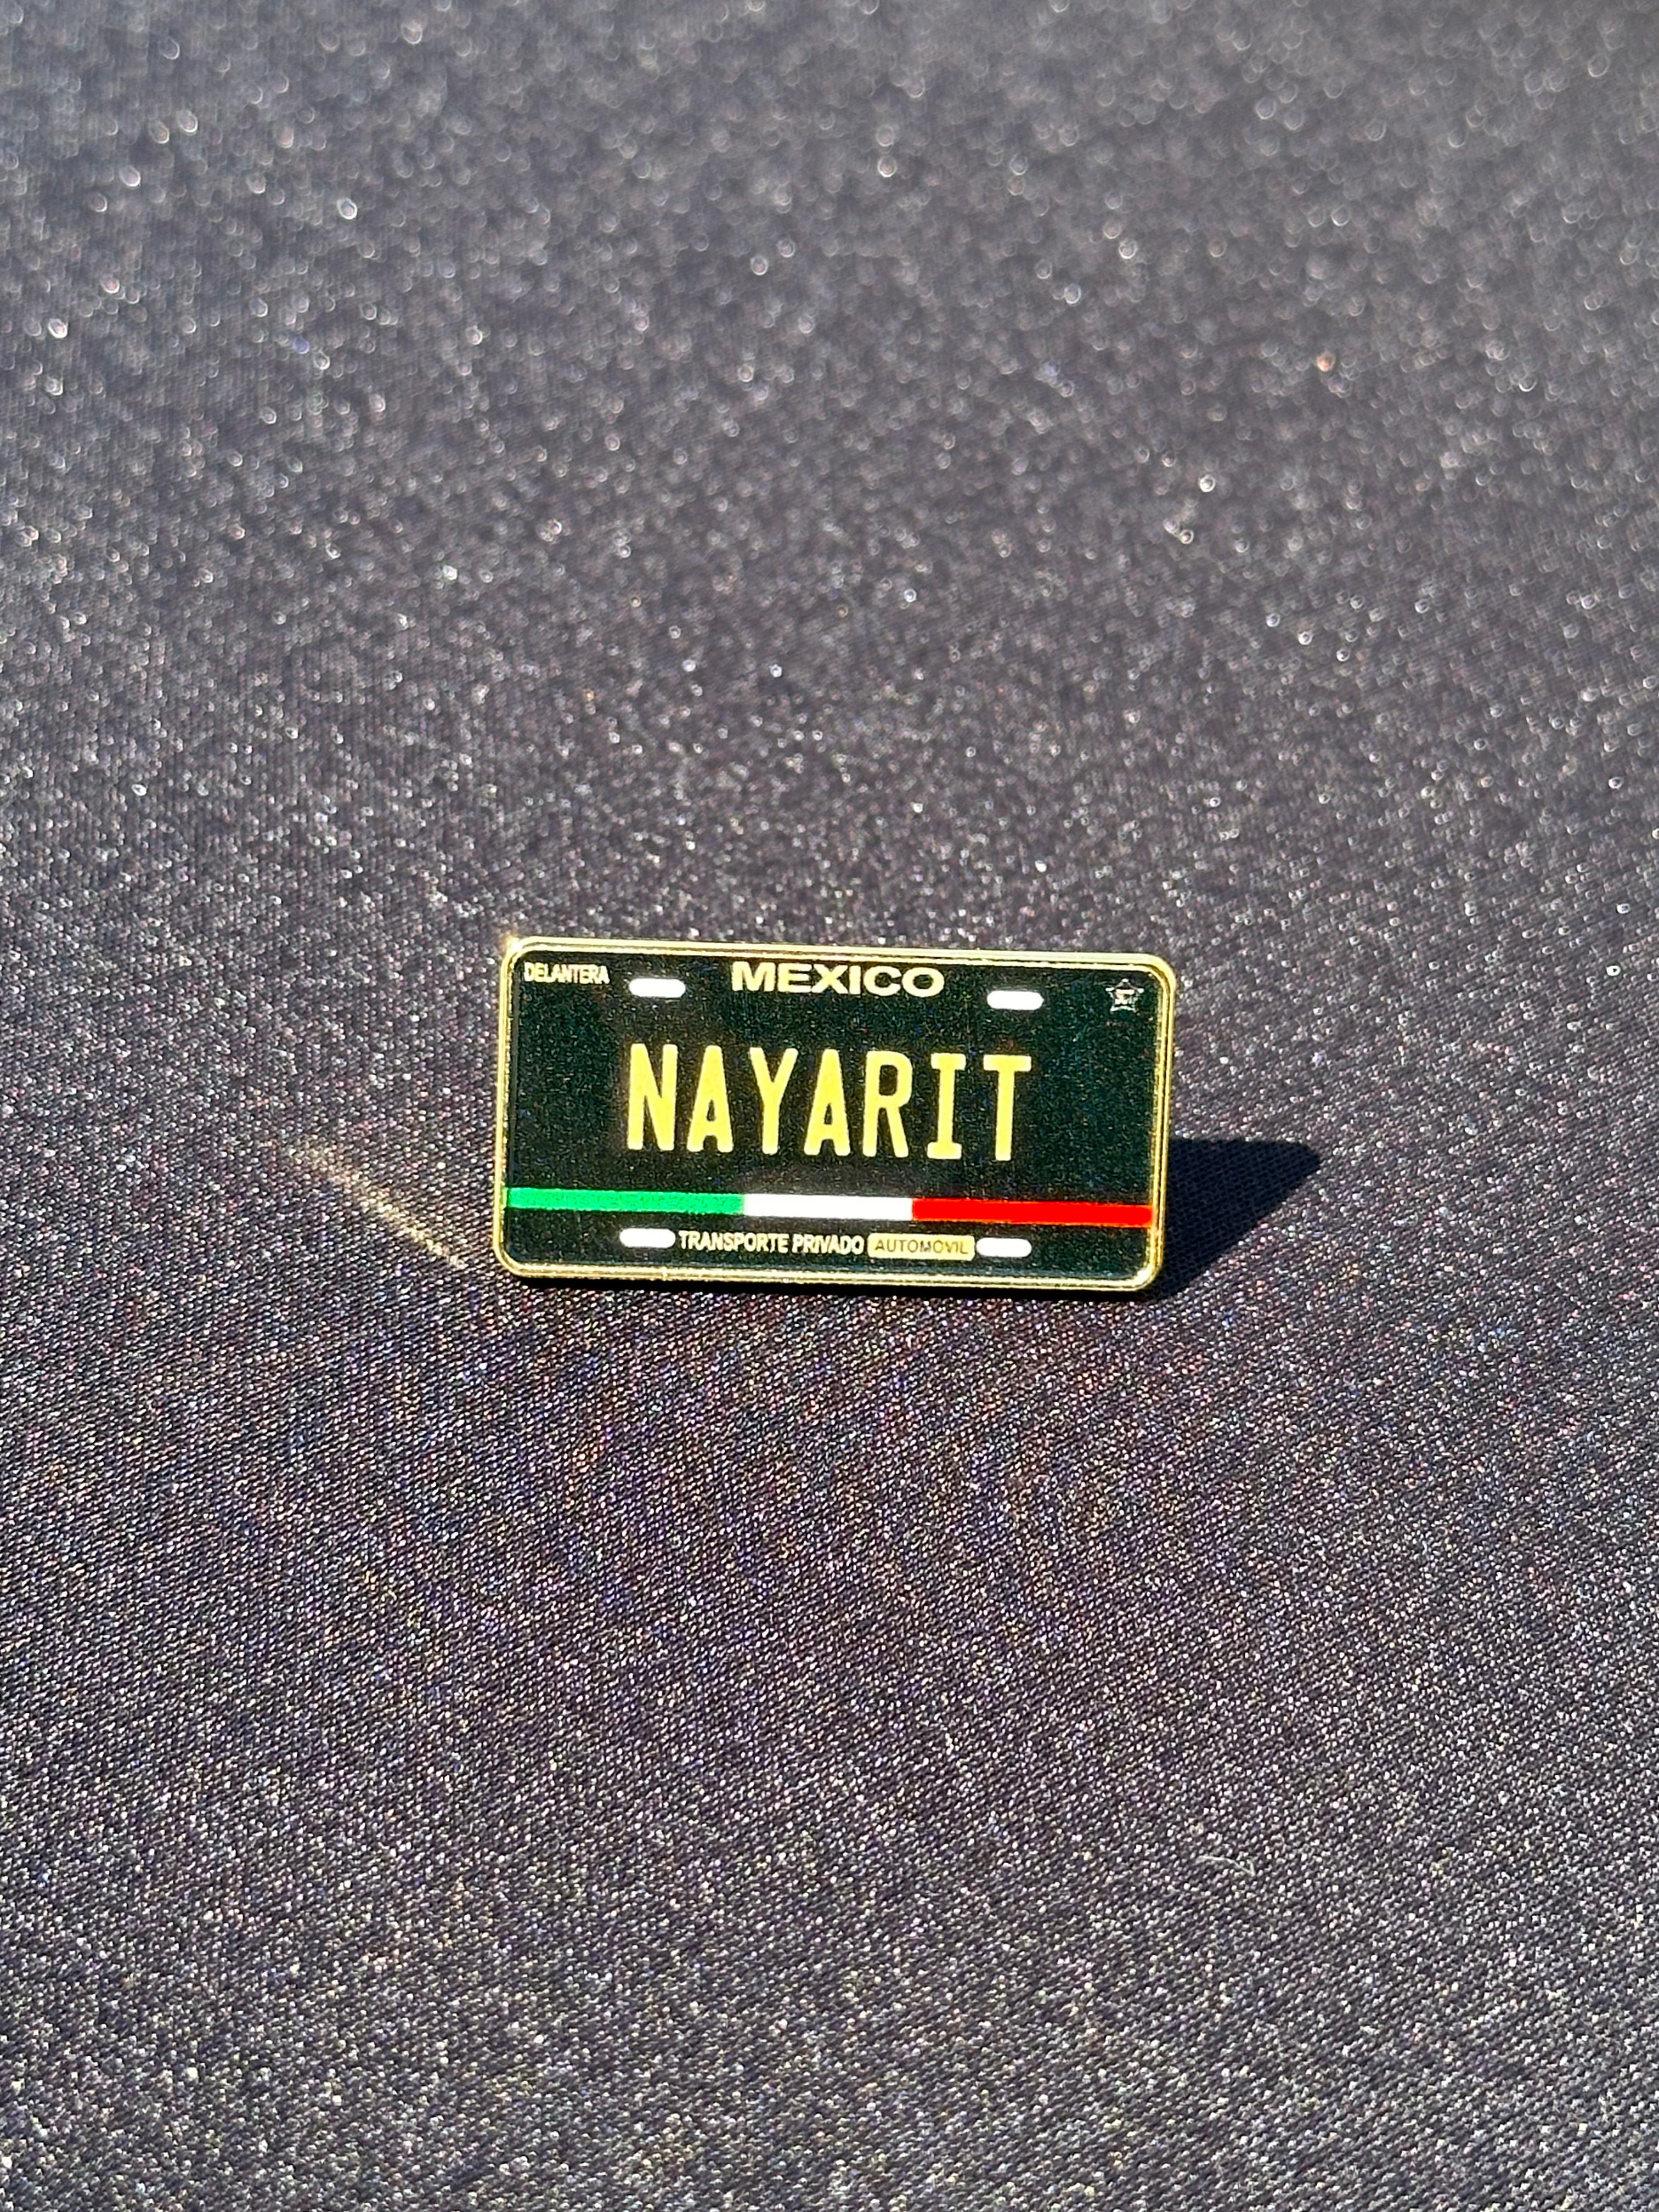 *NEW BLACK "NAYARIT" EXCLUSIVE LICENSE PLATE PIN VERY LIMITED